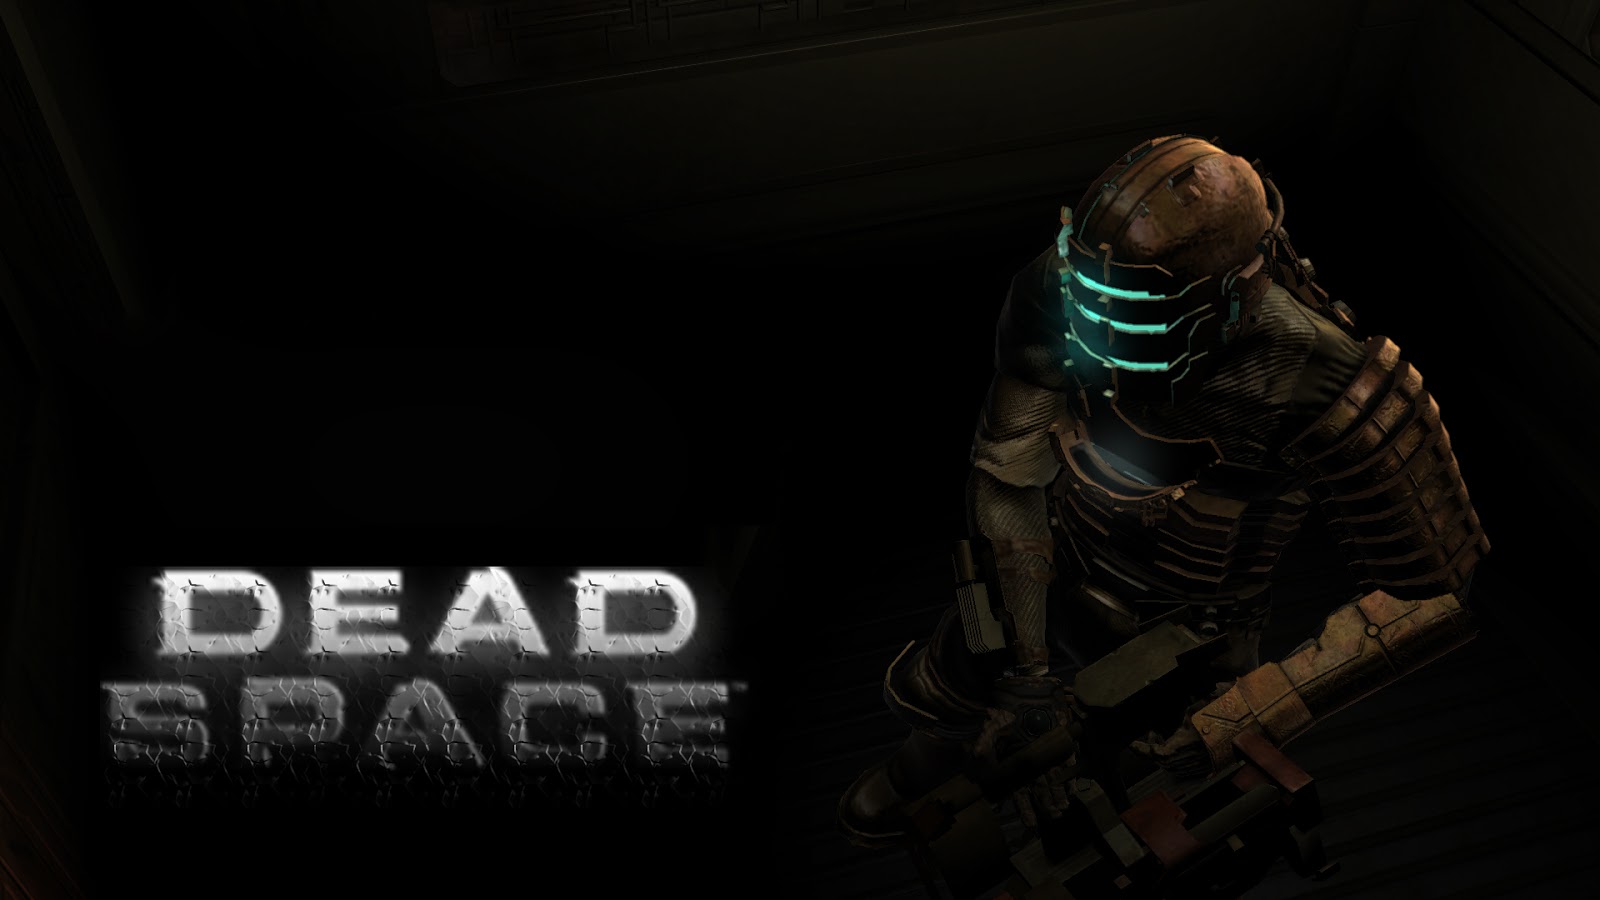 how to mod an xbox 360 dead space 2 save to unlock hacker suit